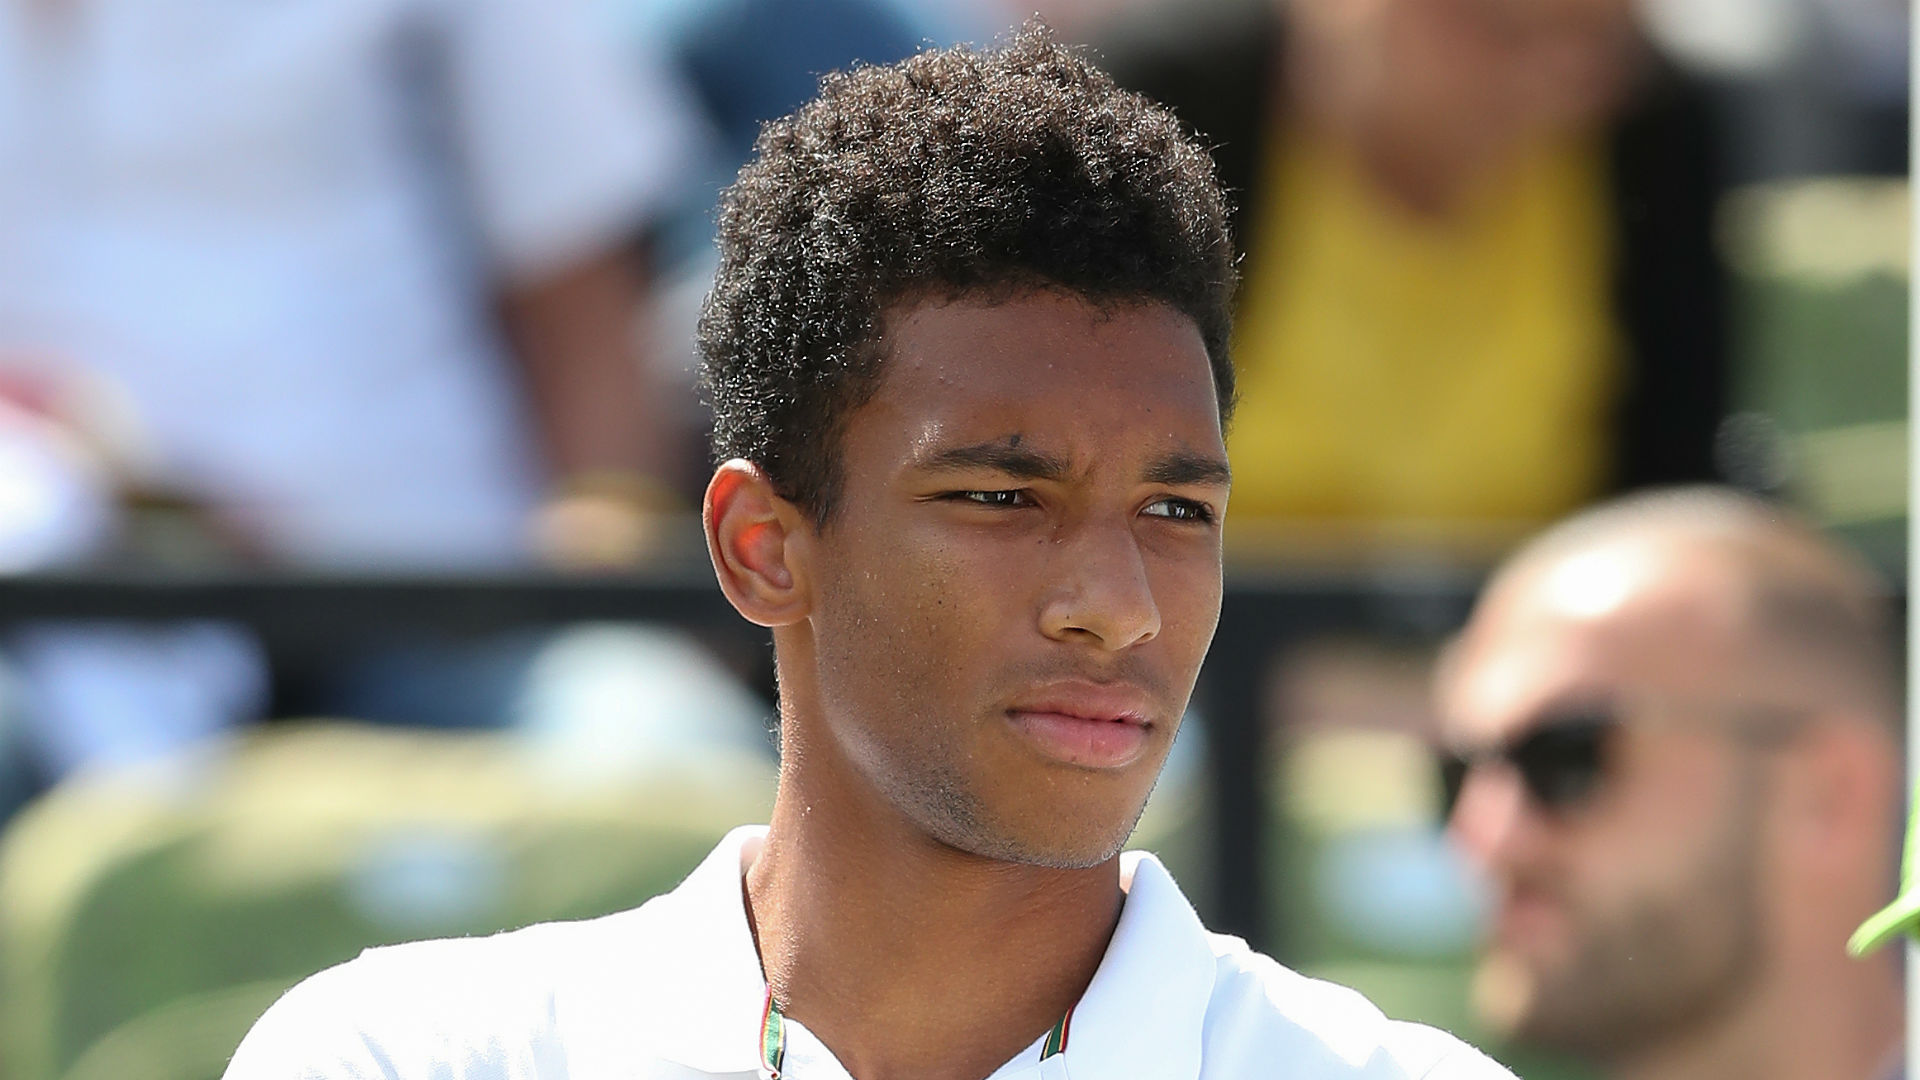 Matteo Berrettini and Felix Auger-Aliassime will meet in the Stuttgart Open final, but the semi-finals are yet to be resolved in Den Bosch